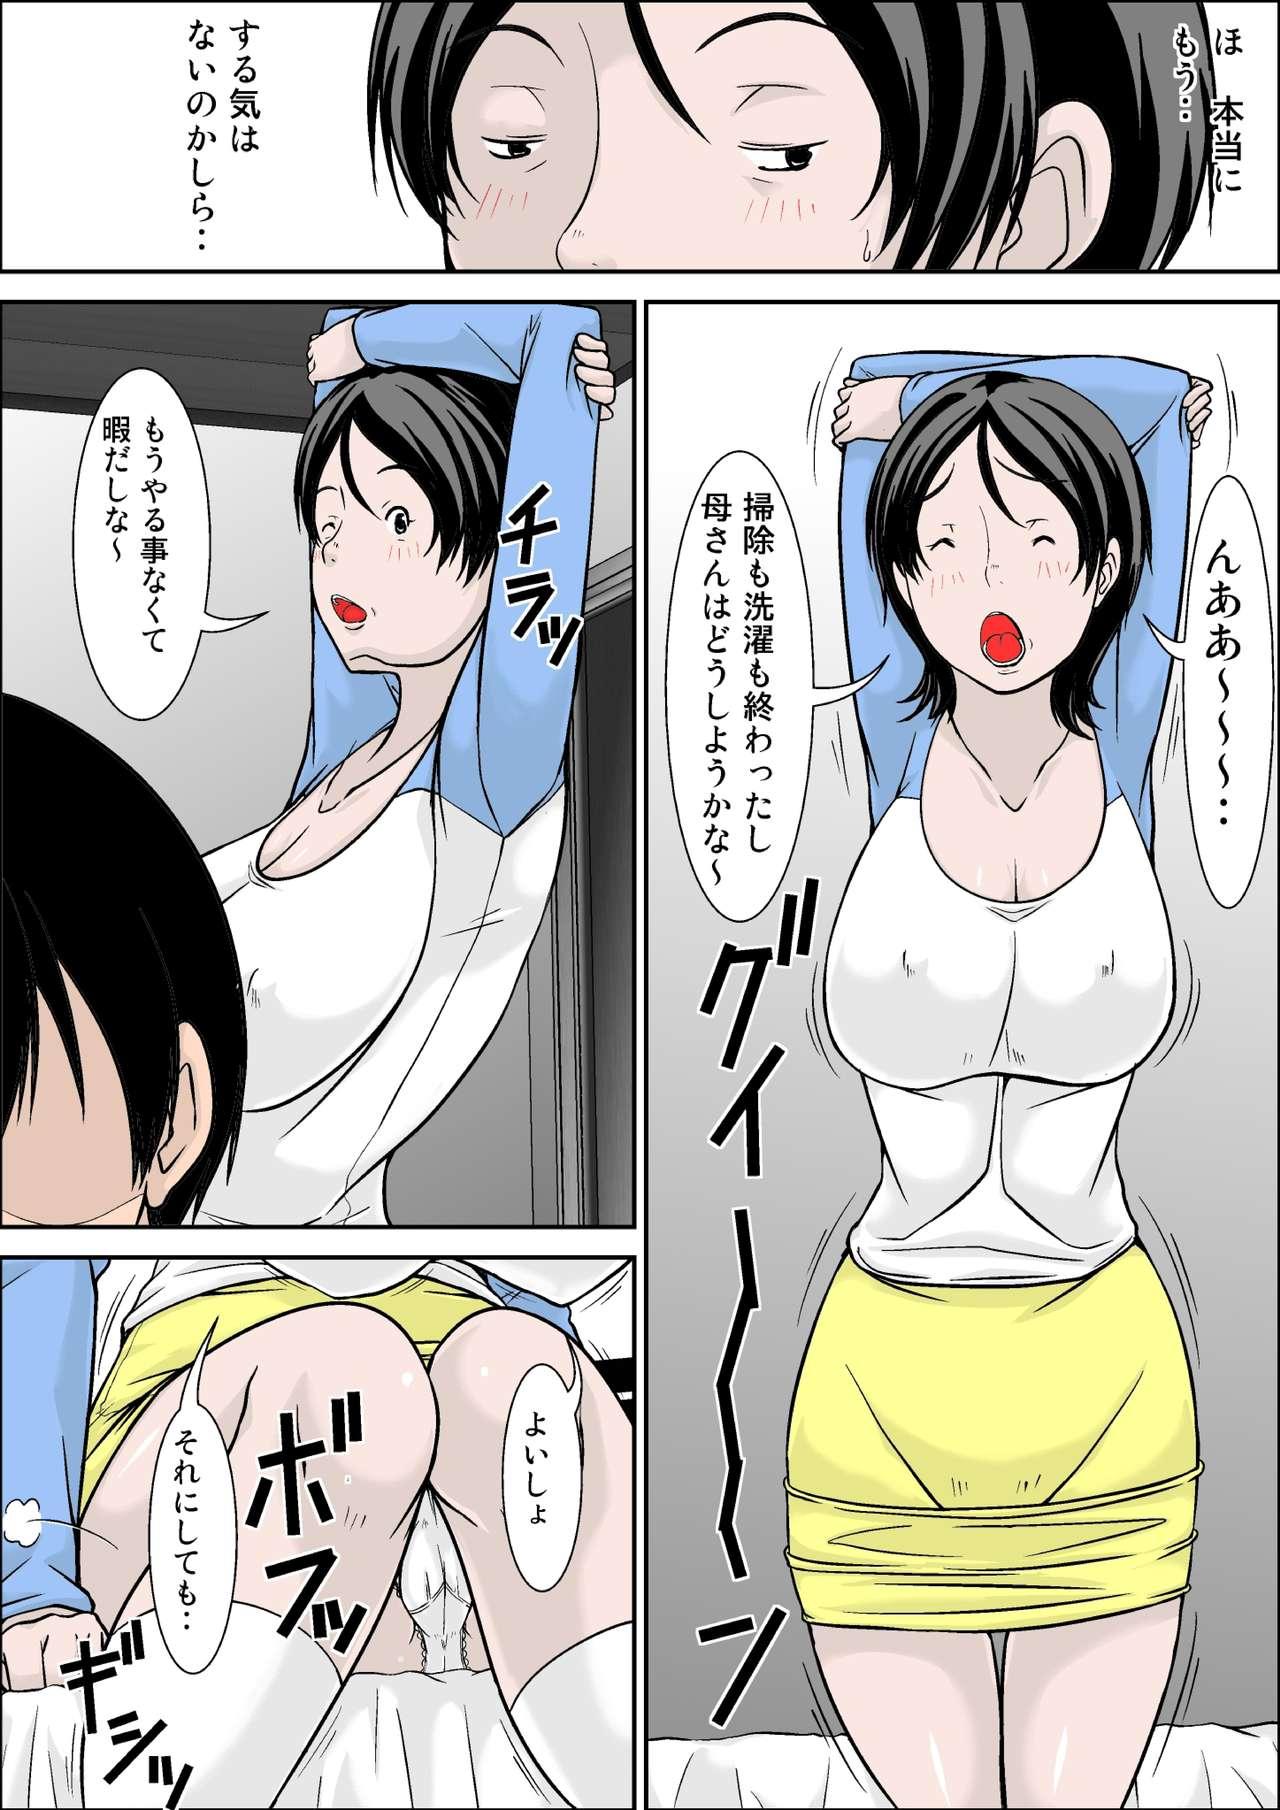 Hey! It is said that I urge you mother and will do what! ... mother Hatsujou - 1st part 7